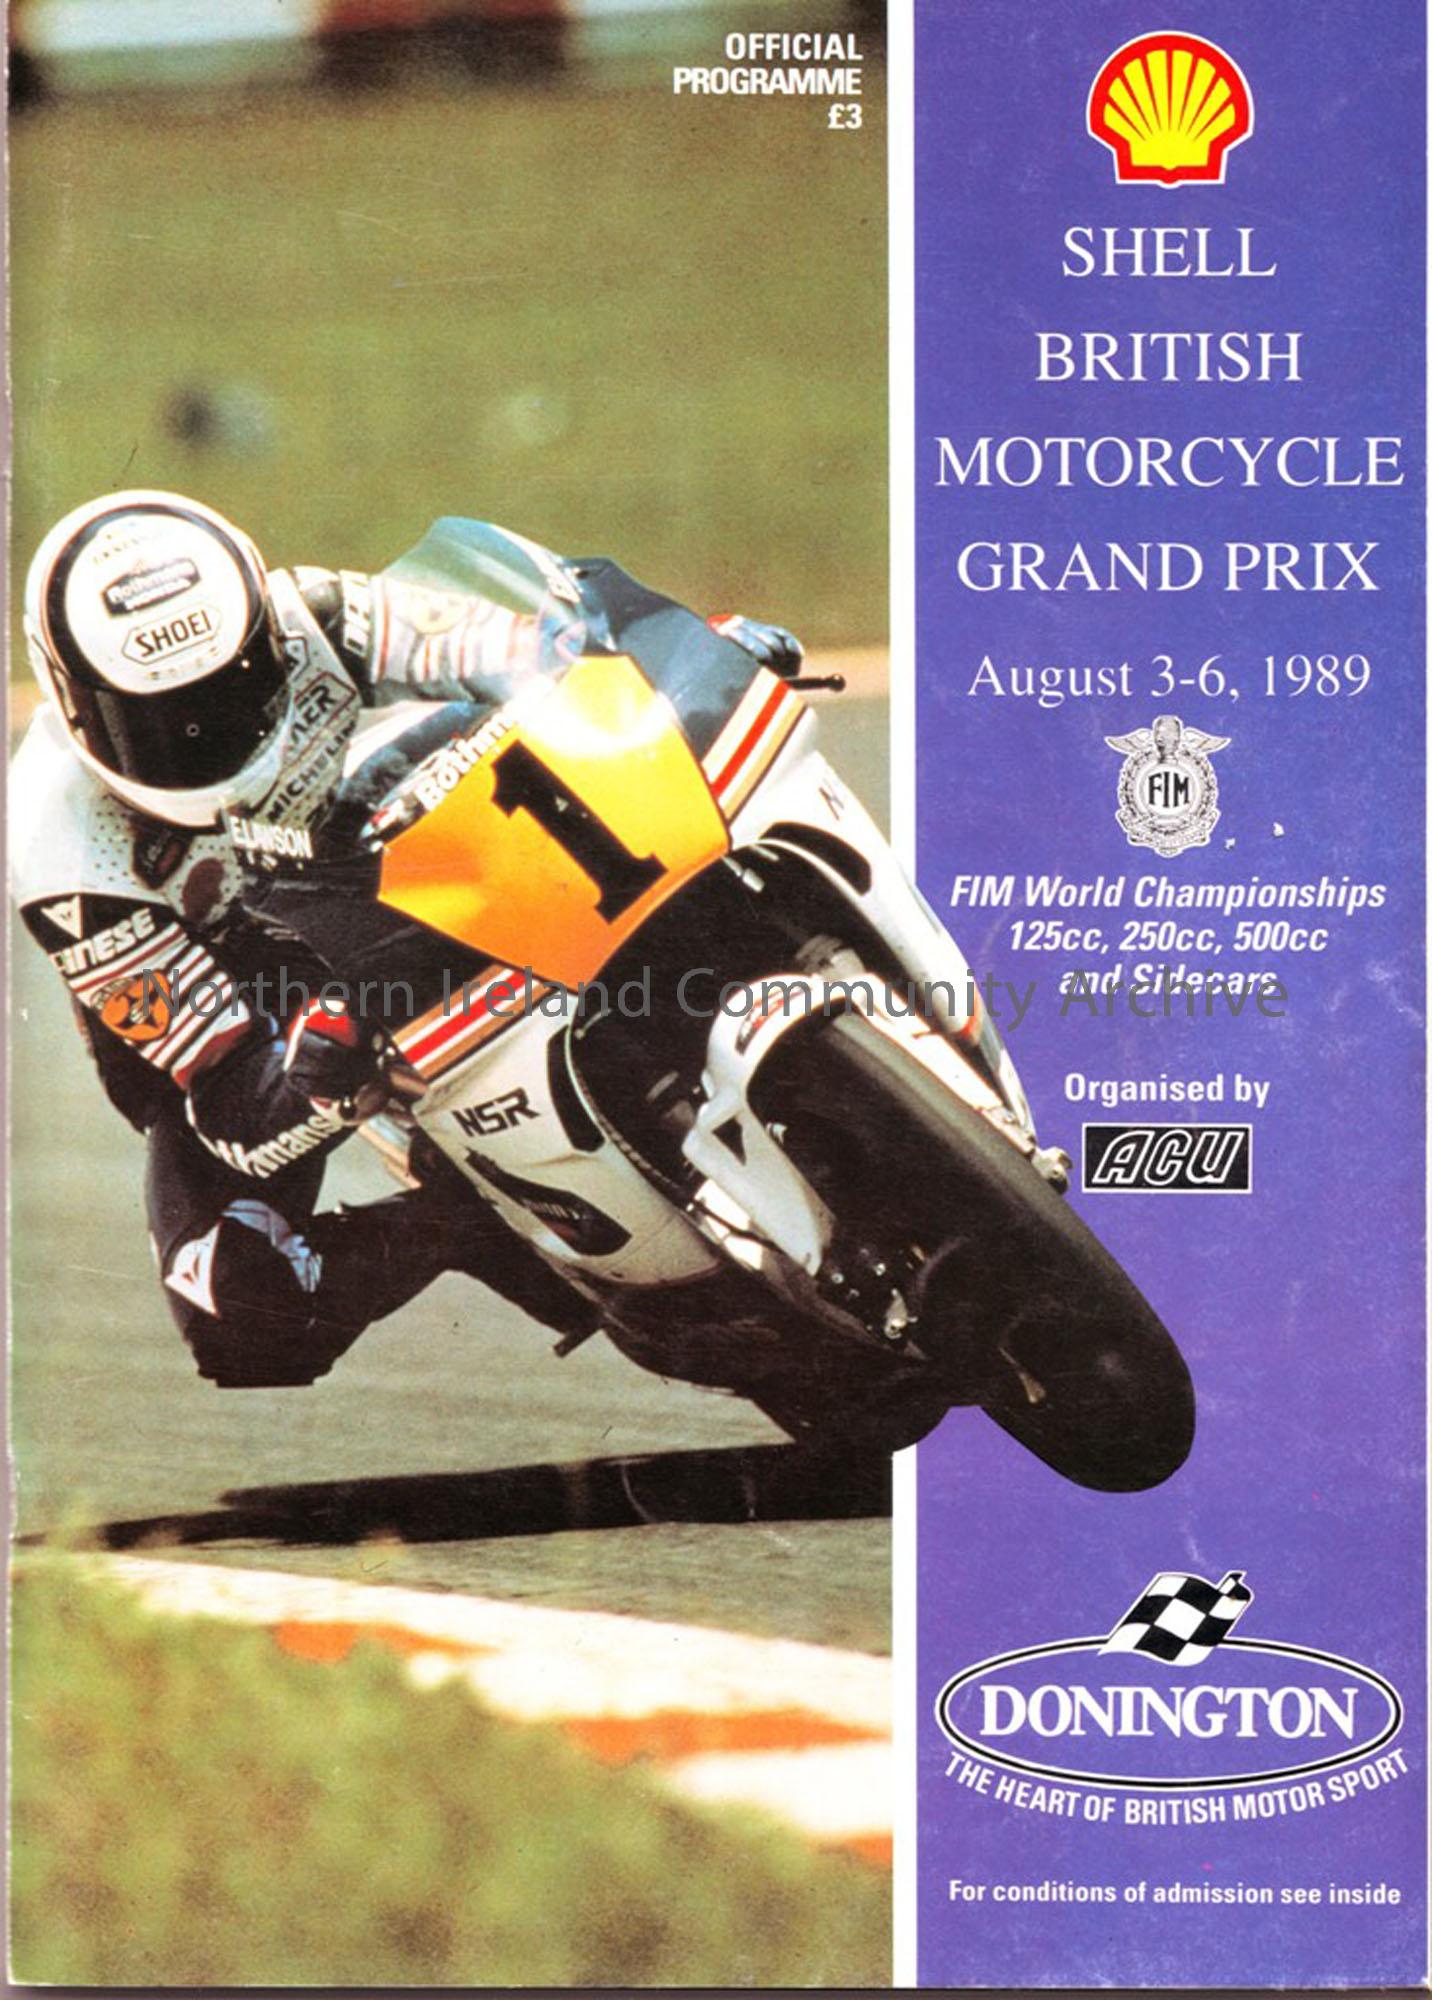 Shell British Motorcycle Grand Prix. August 3-6, 1989. Includes lists of Entrants in each class and lap score charts.